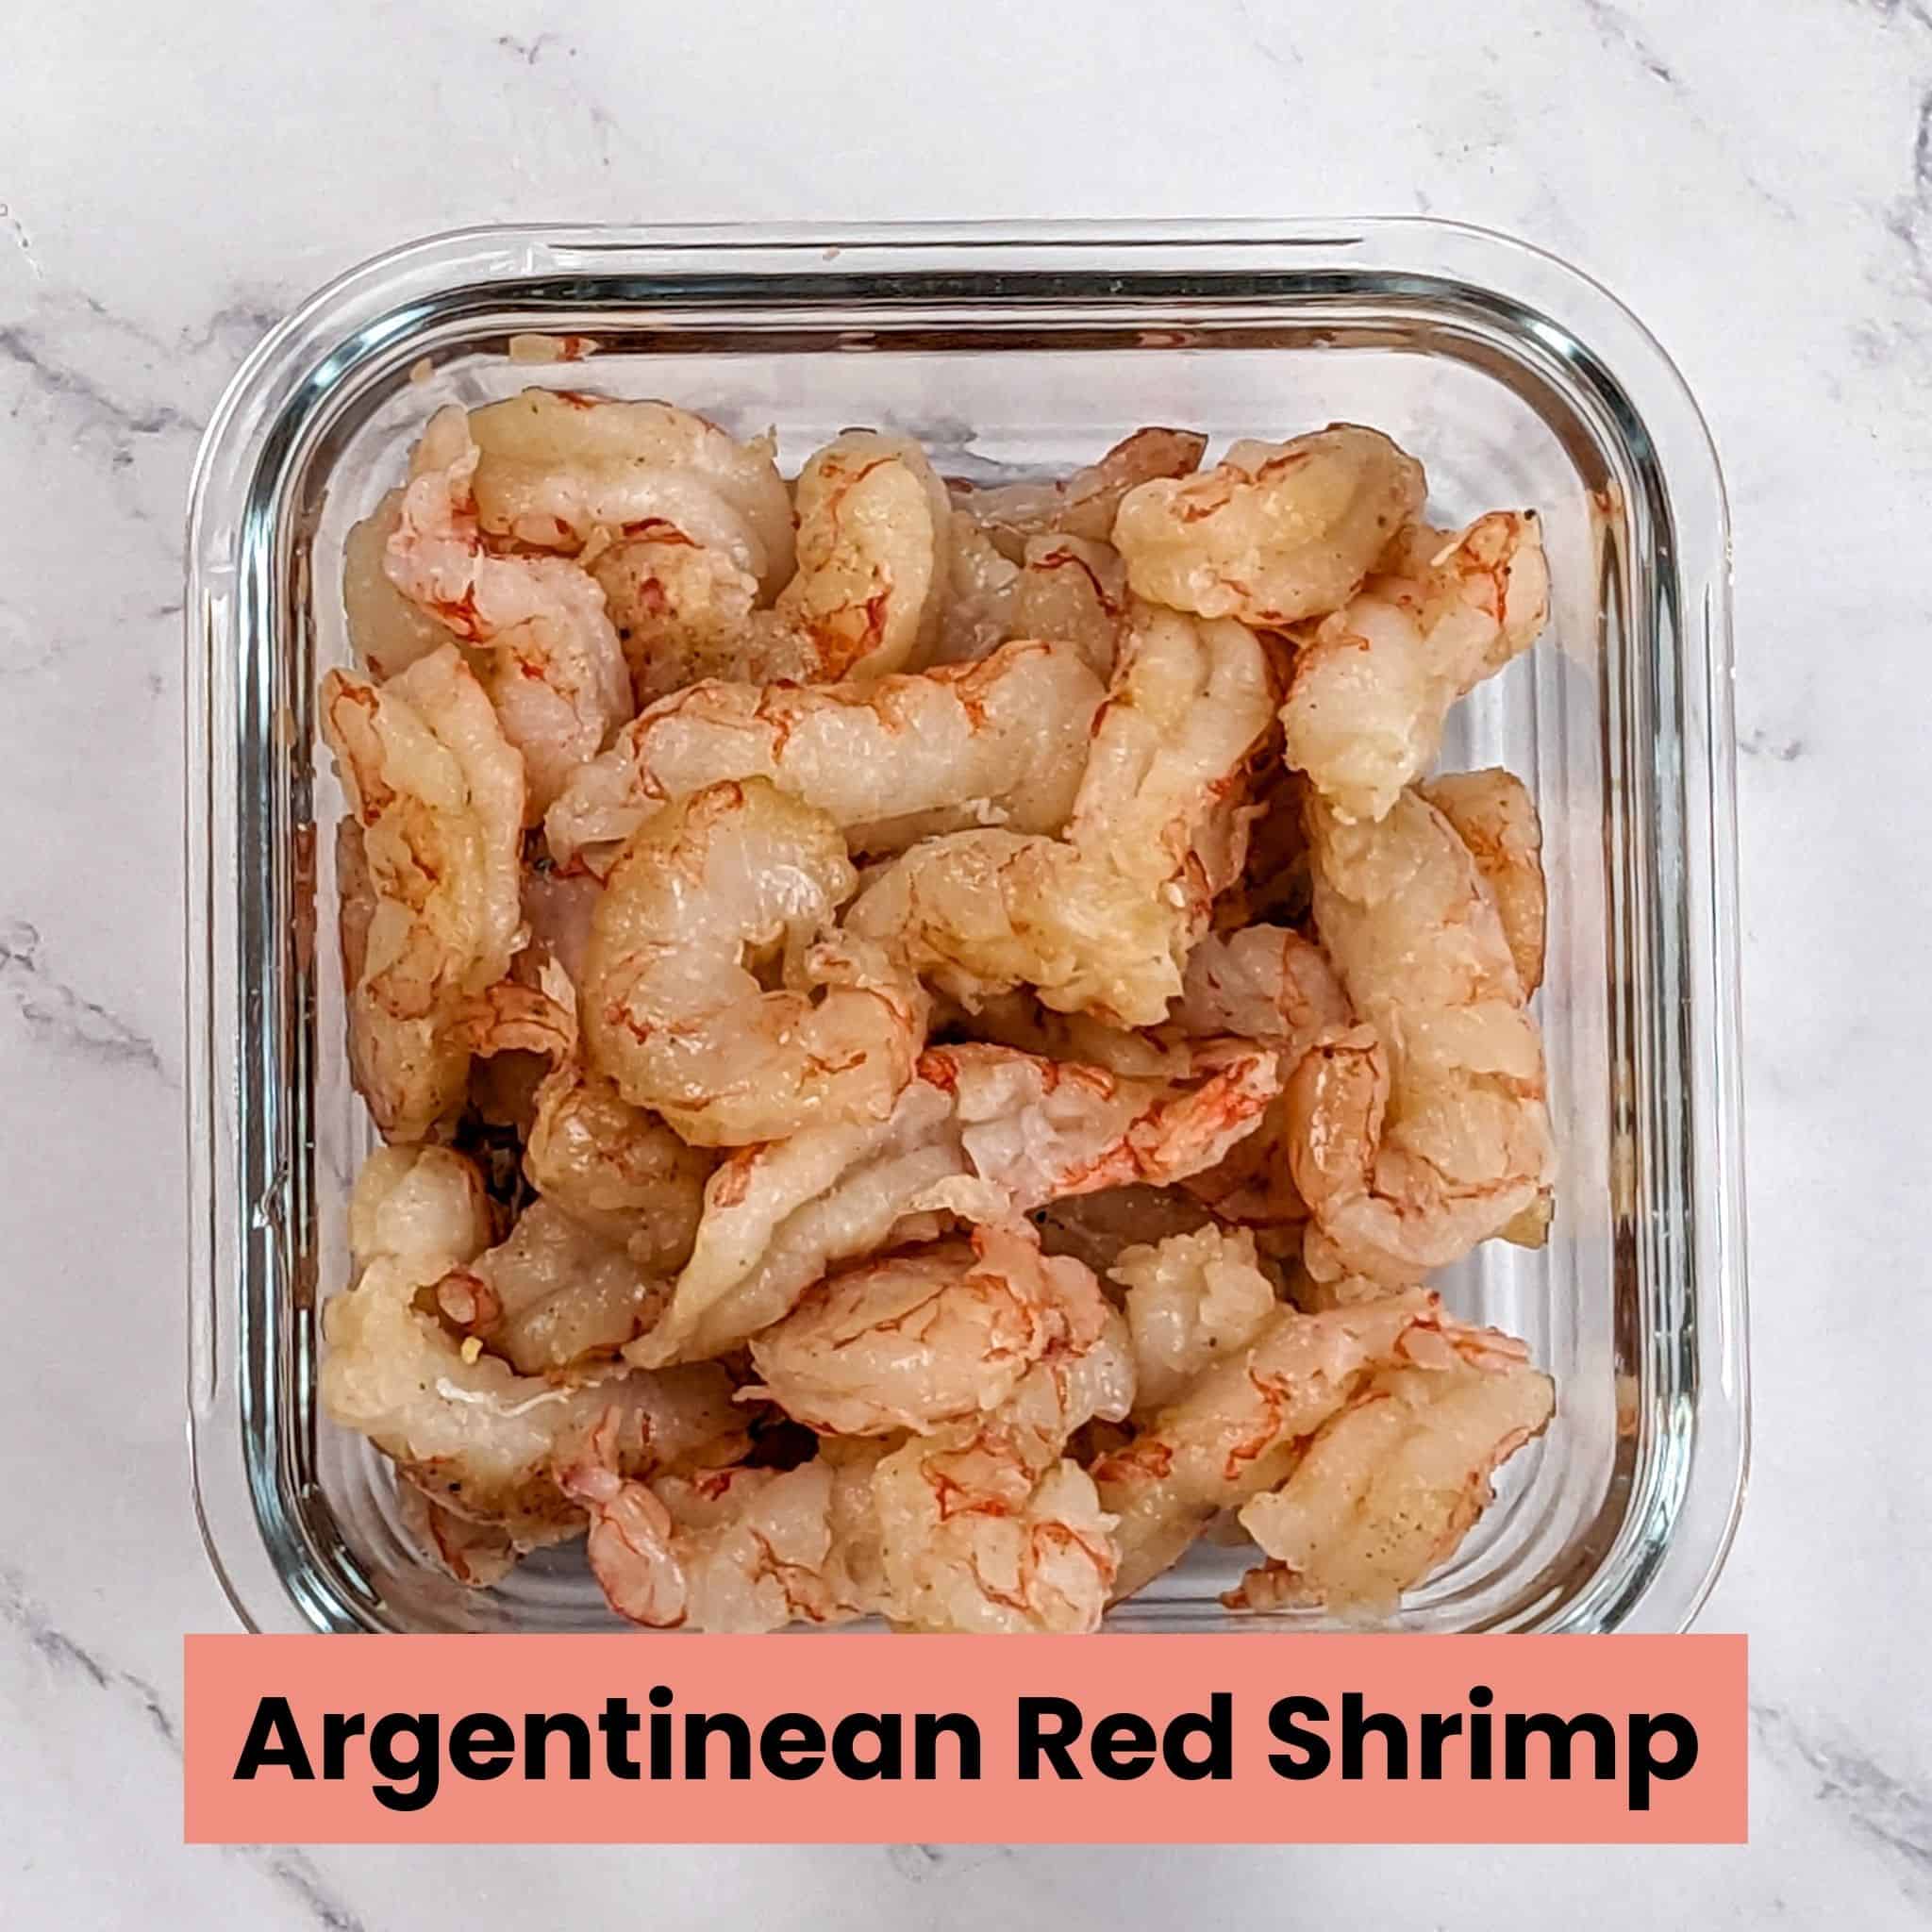 raw peel deveined tail off argentinean red shrimp in a square glass container.